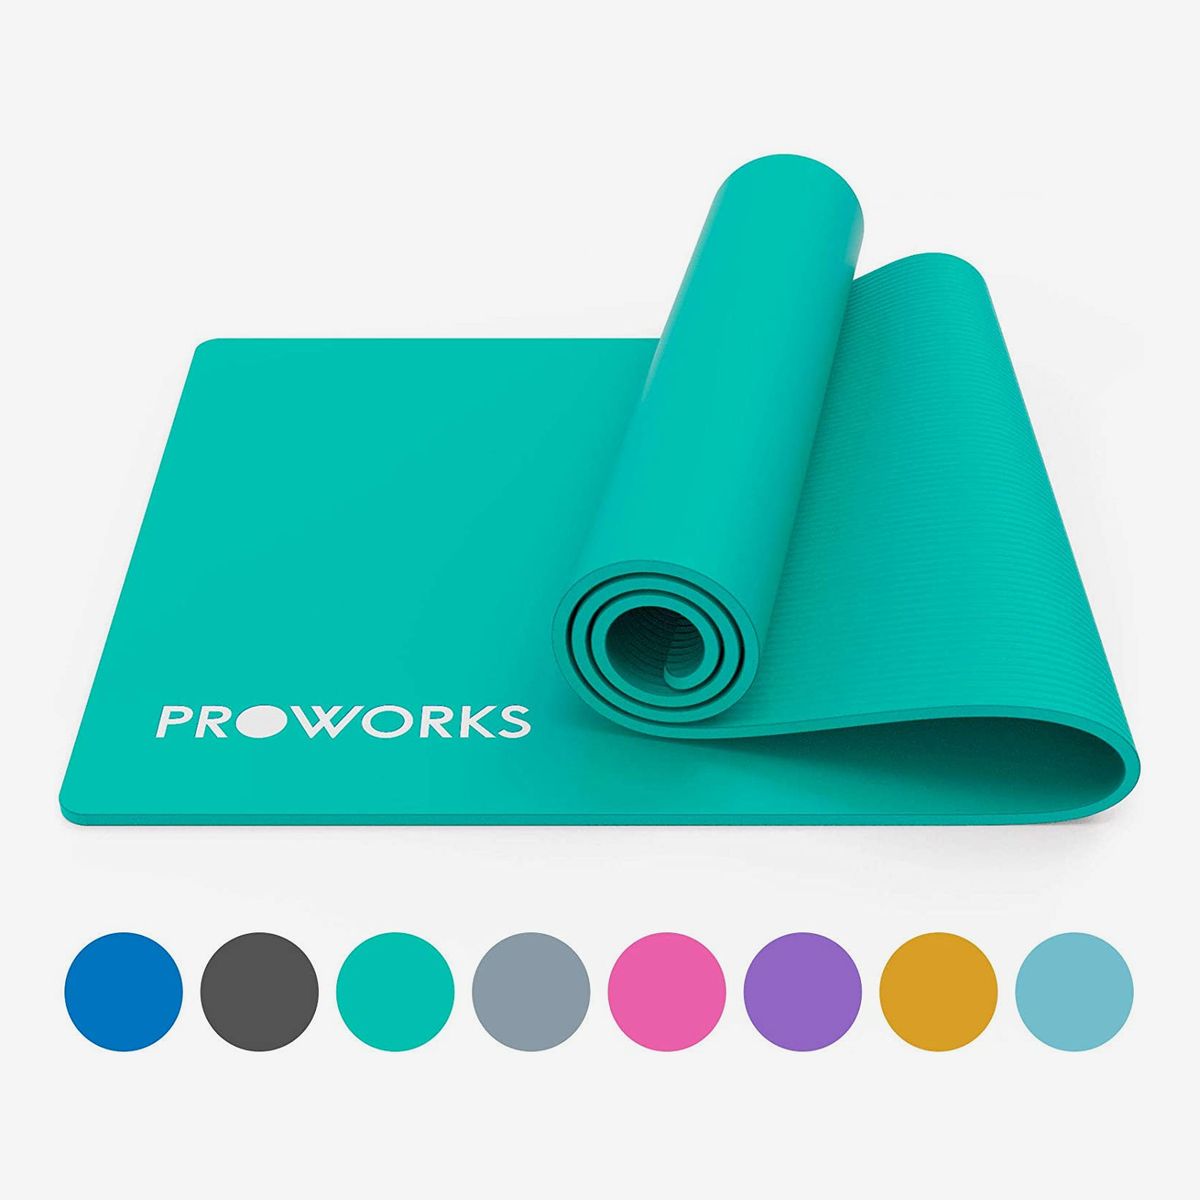 yoga mat with words